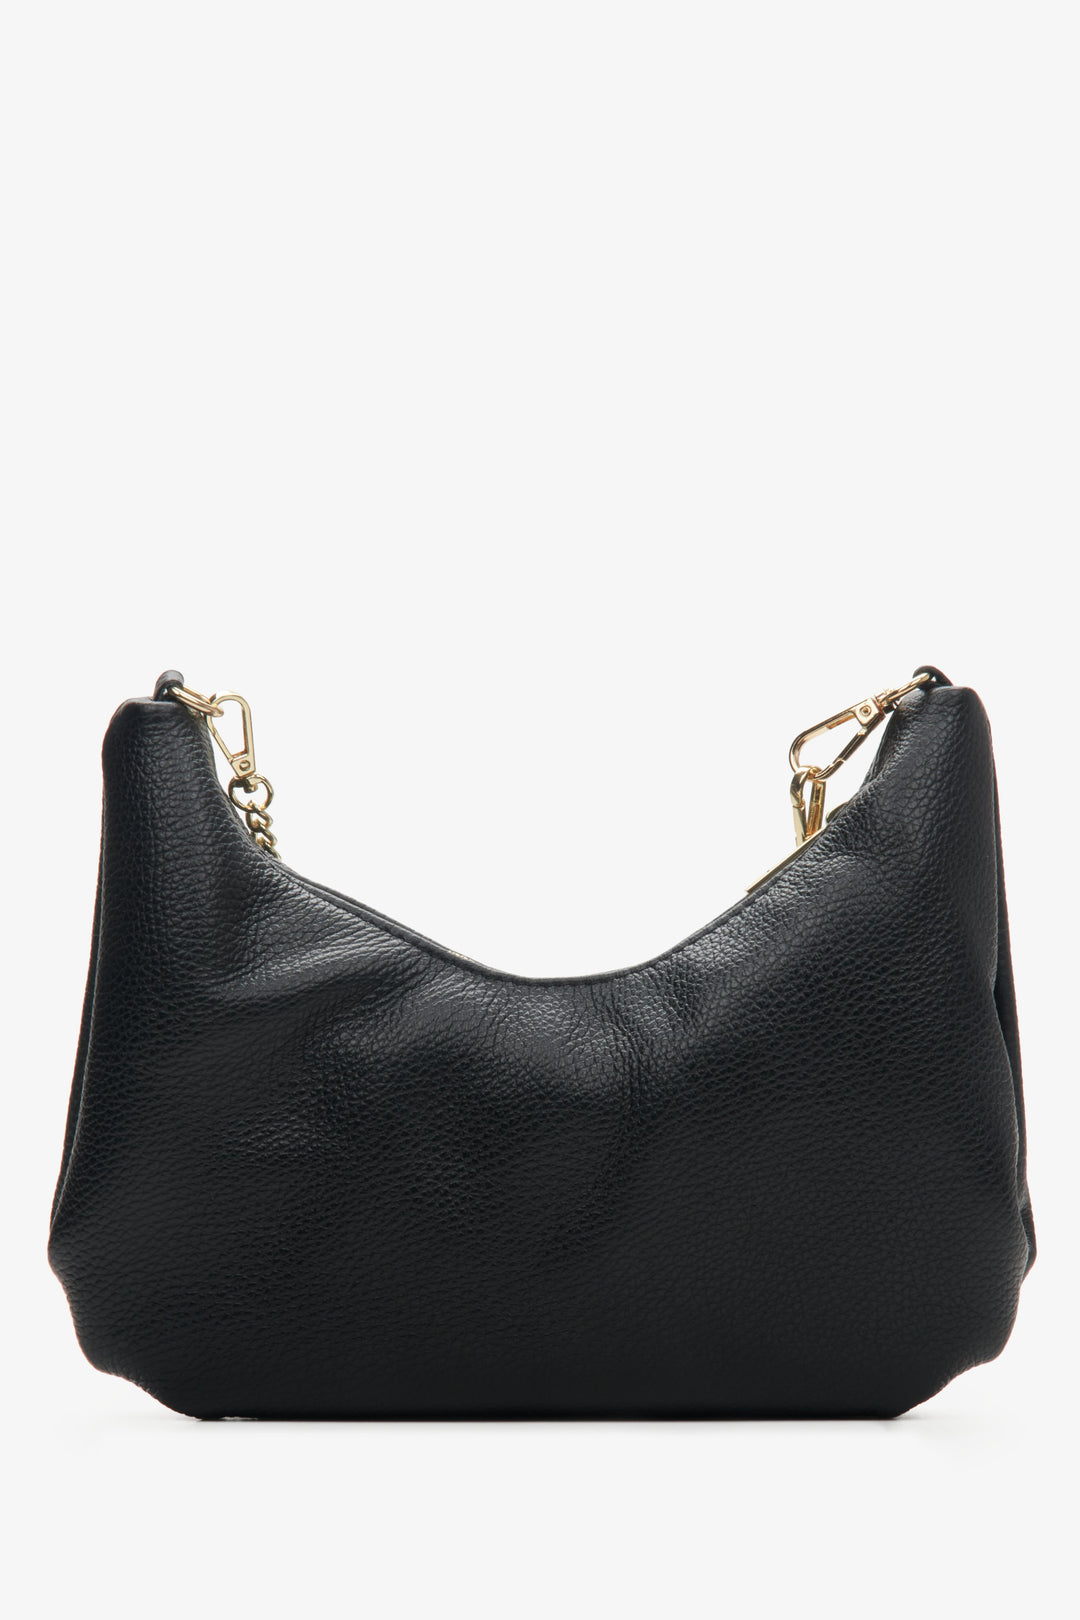 Women's black baguette handbag made of Italian genuine leather with a golden chain.